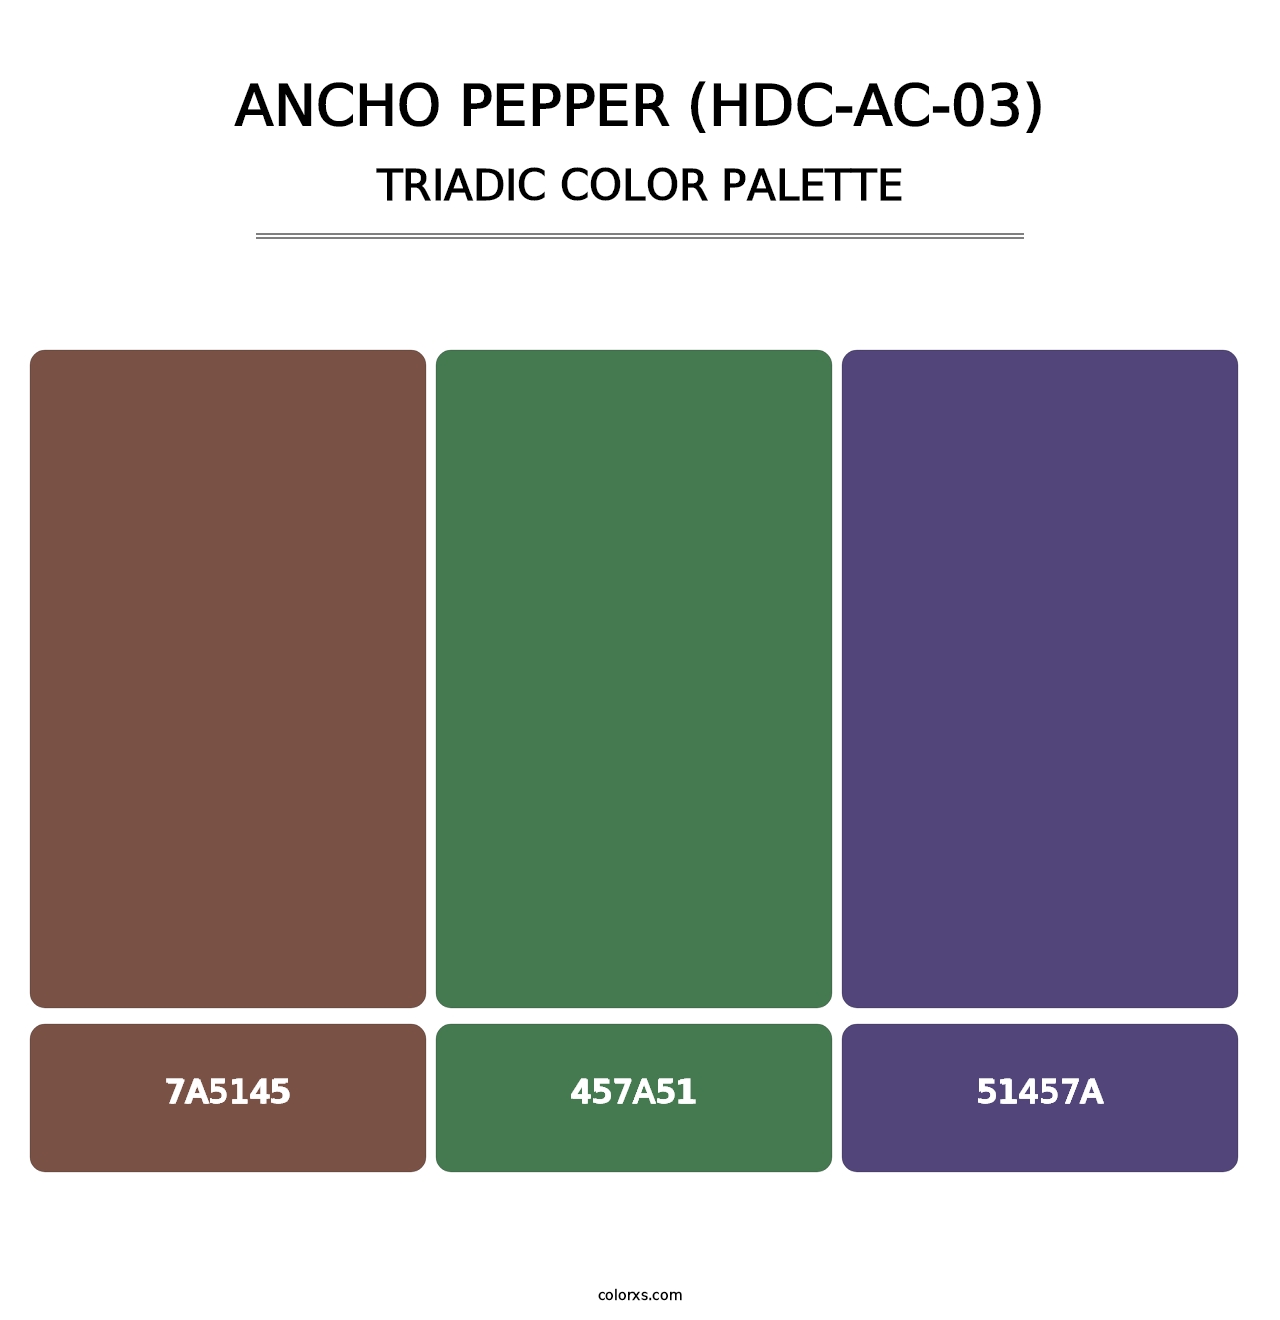 Ancho Pepper (HDC-AC-03) - Triadic Color Palette